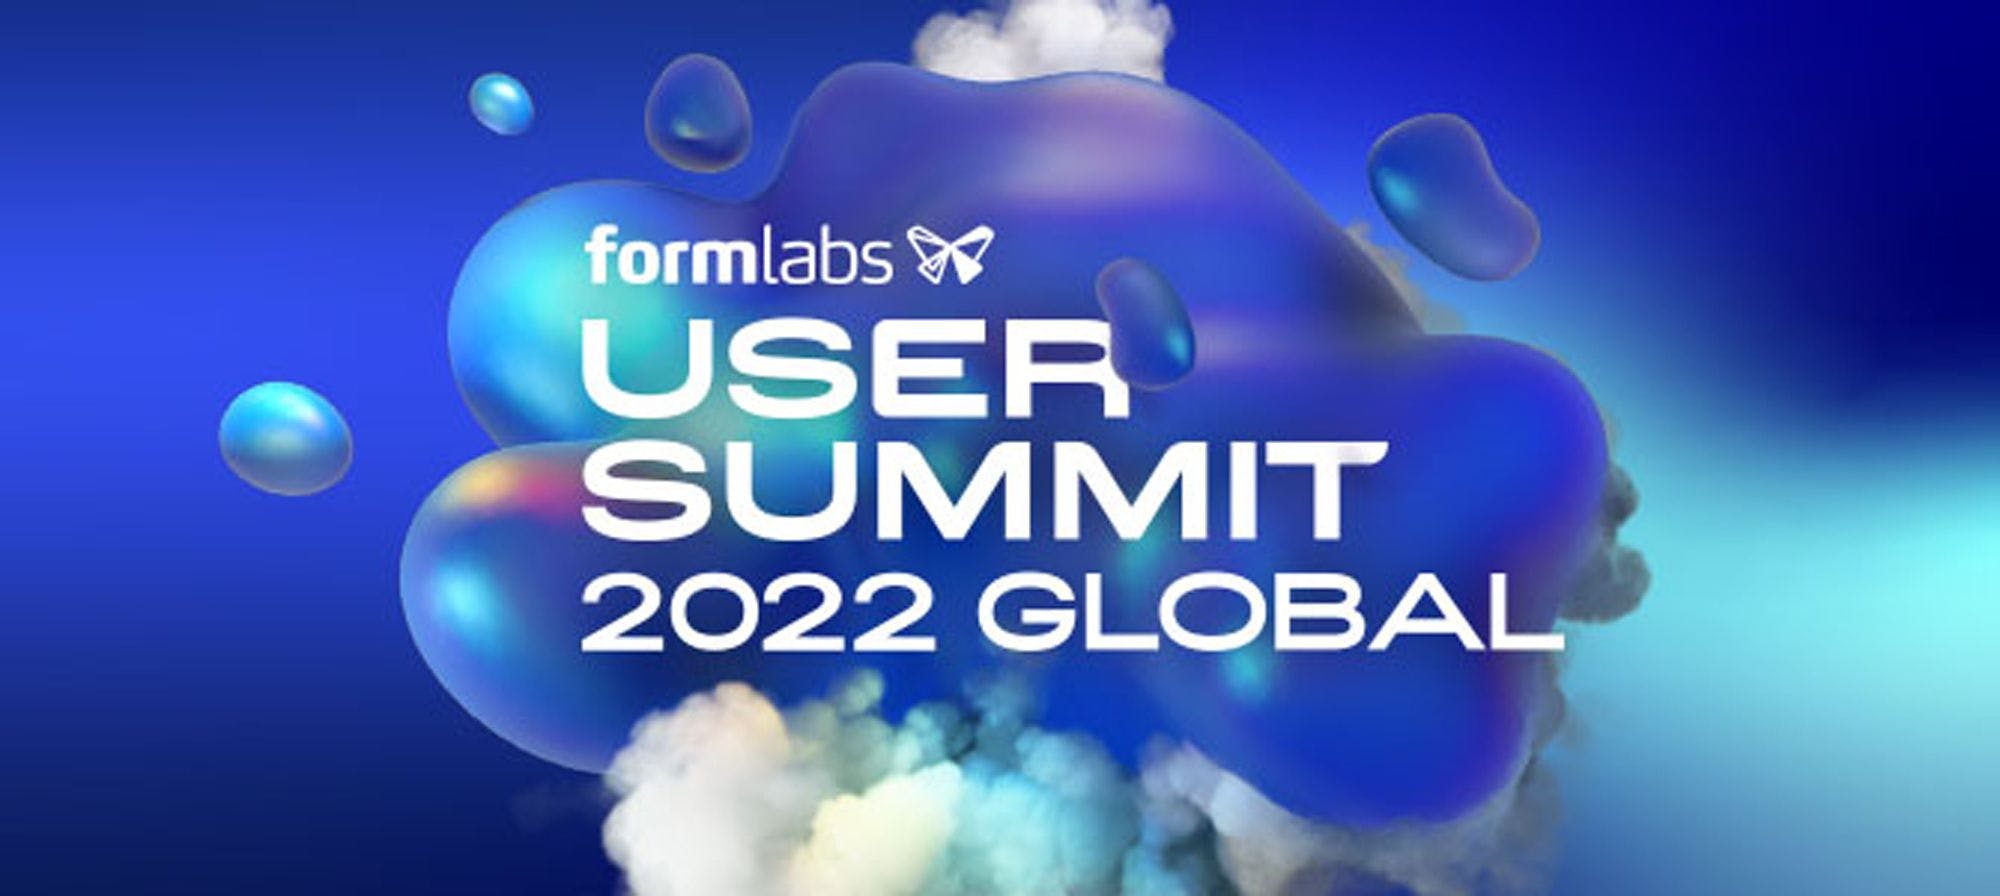 Formlabs to Host Fifth Annual Virtual Summit to Showcase Innovations